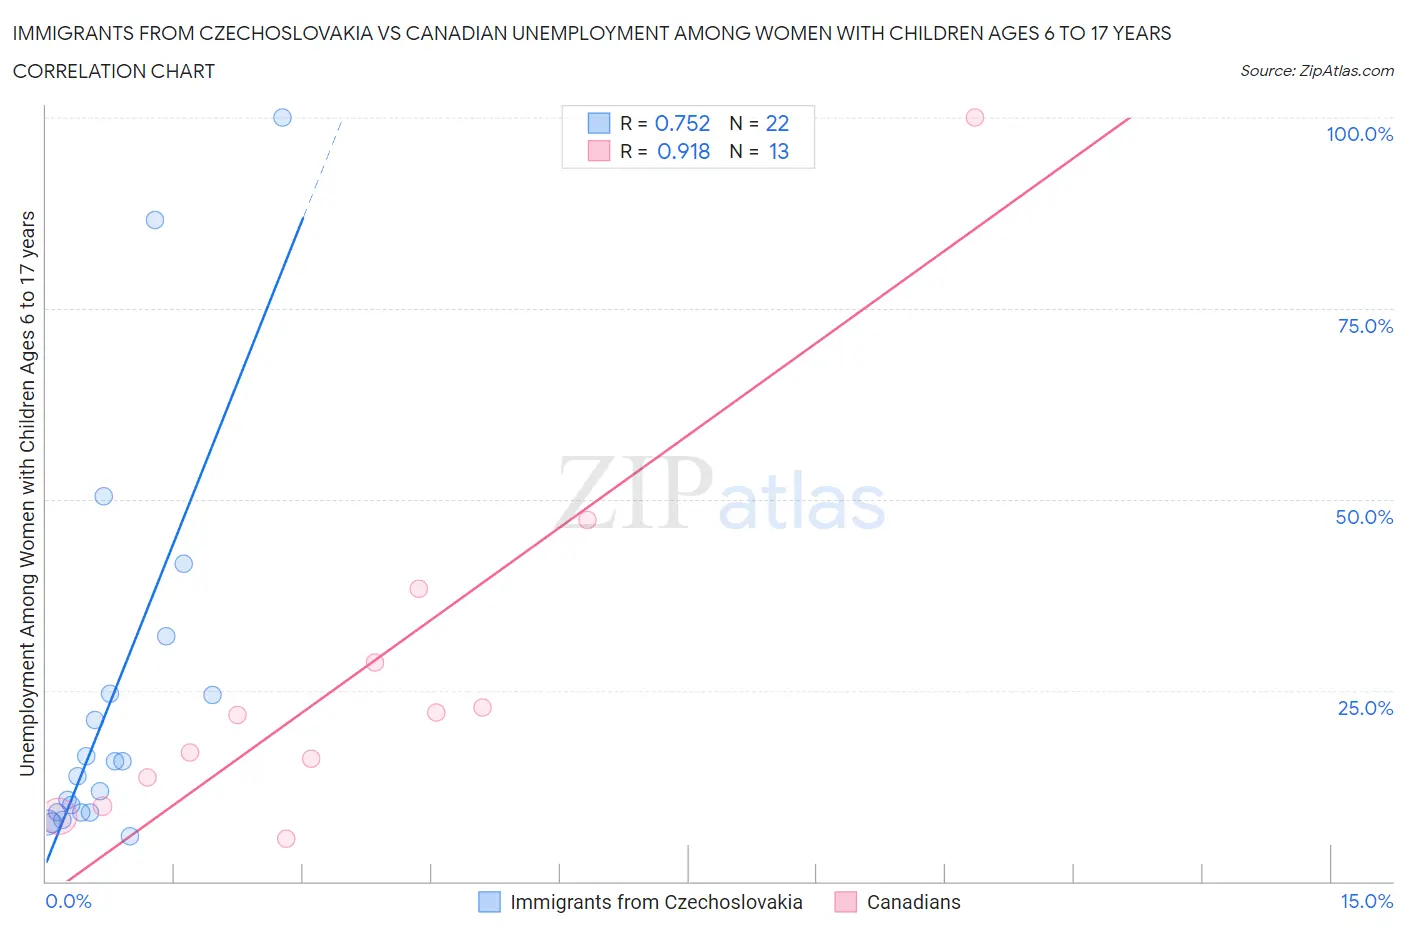 Immigrants from Czechoslovakia vs Canadian Unemployment Among Women with Children Ages 6 to 17 years